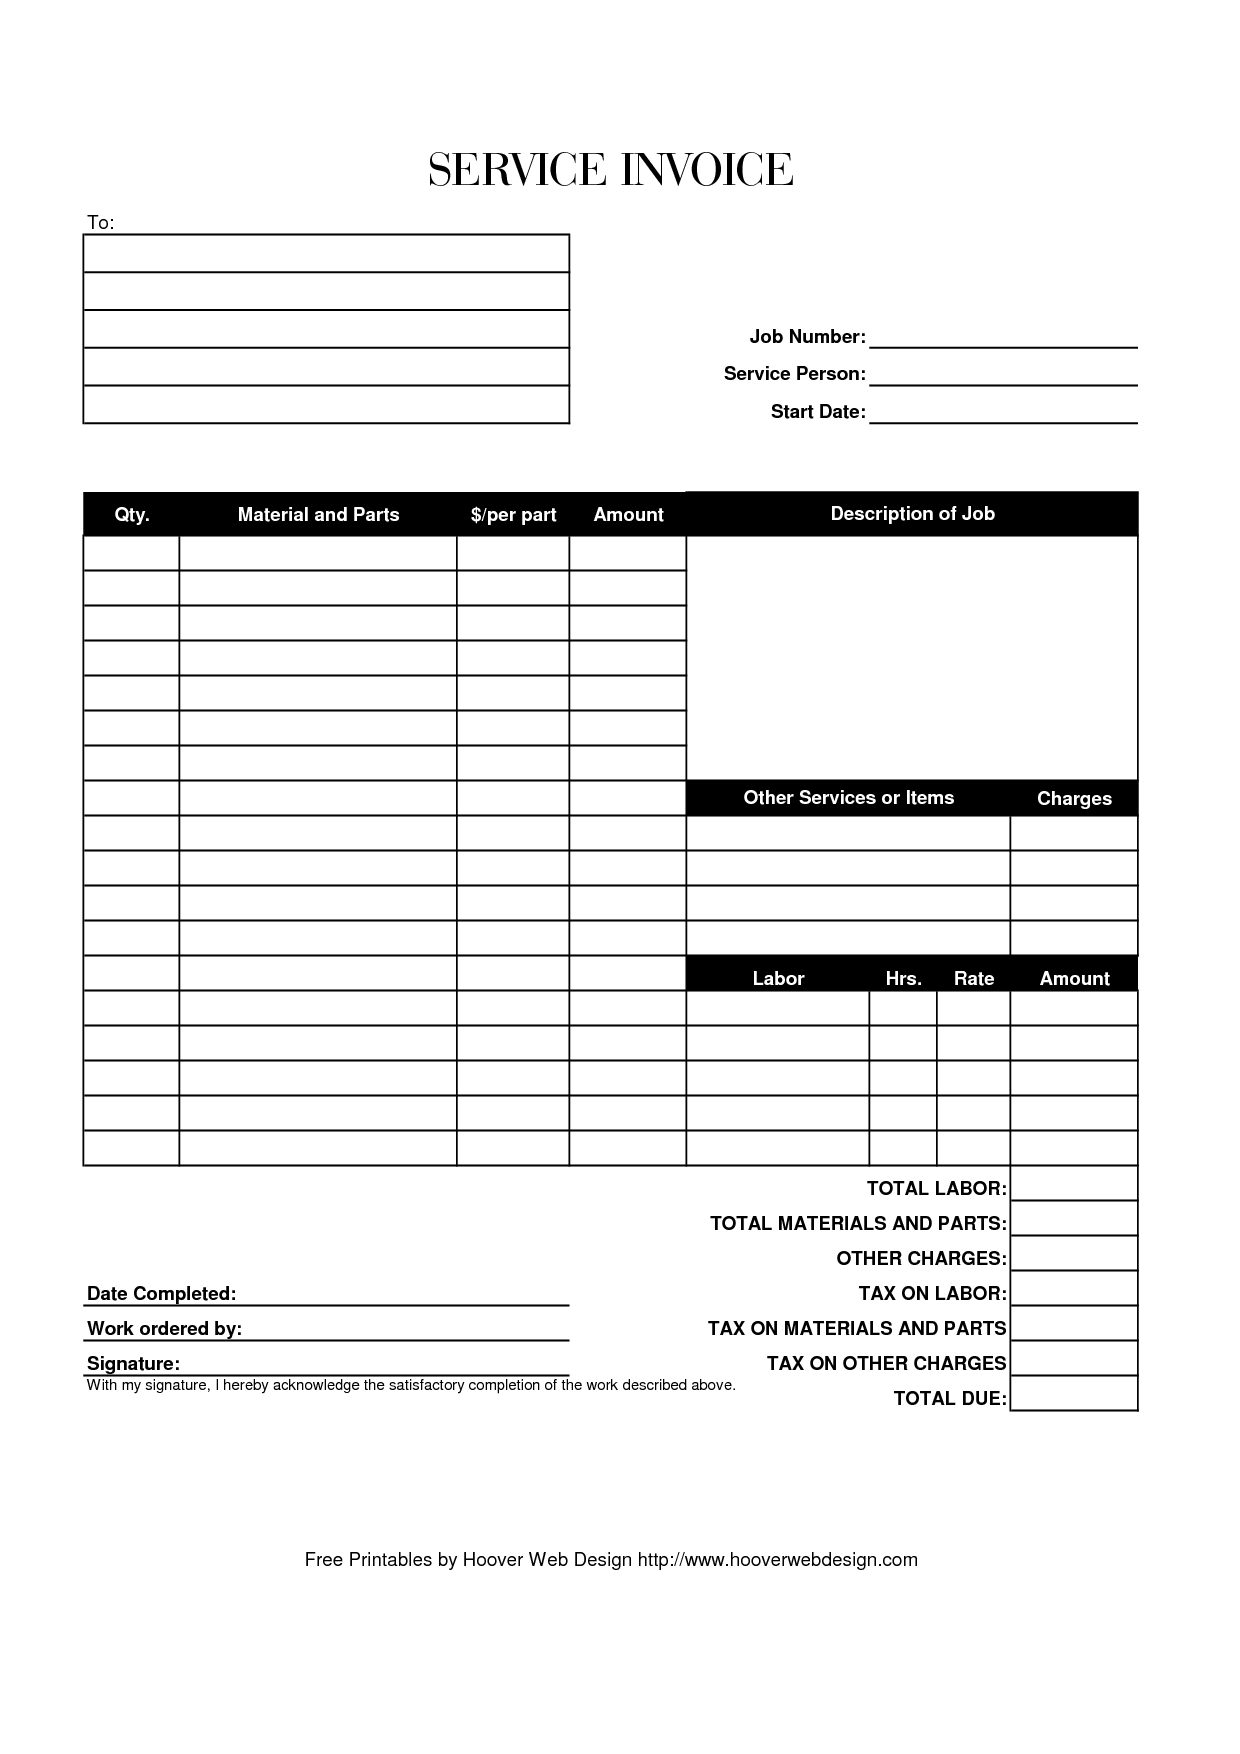 Hoover Receipts | Free Printable Service Invoice Template - Pdf - Free Printable Catering Invoice Template